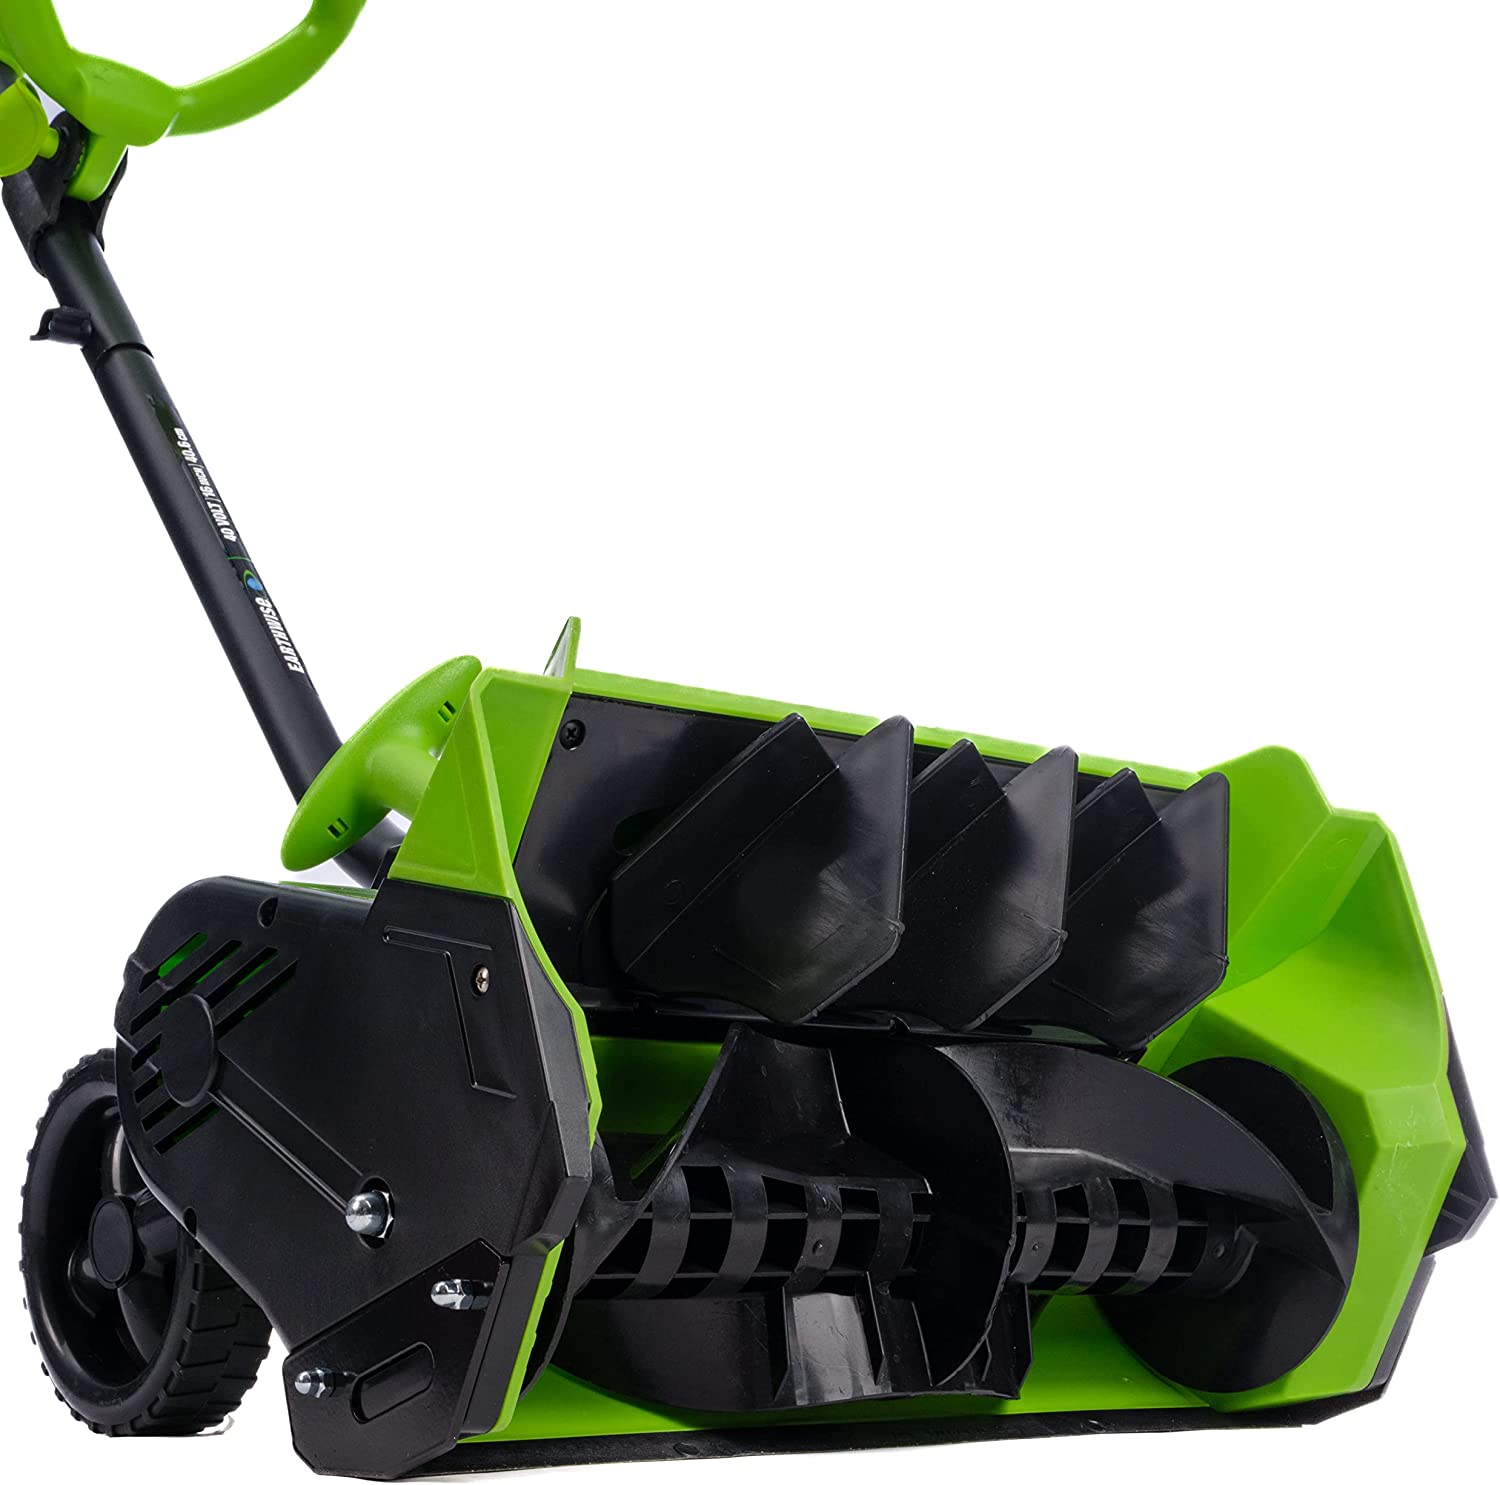 Earthwise SN74016 40V Lithium Battery Operated Ion Cordless 16" Snow Shovel with Brushless Motor - image 3 of 10